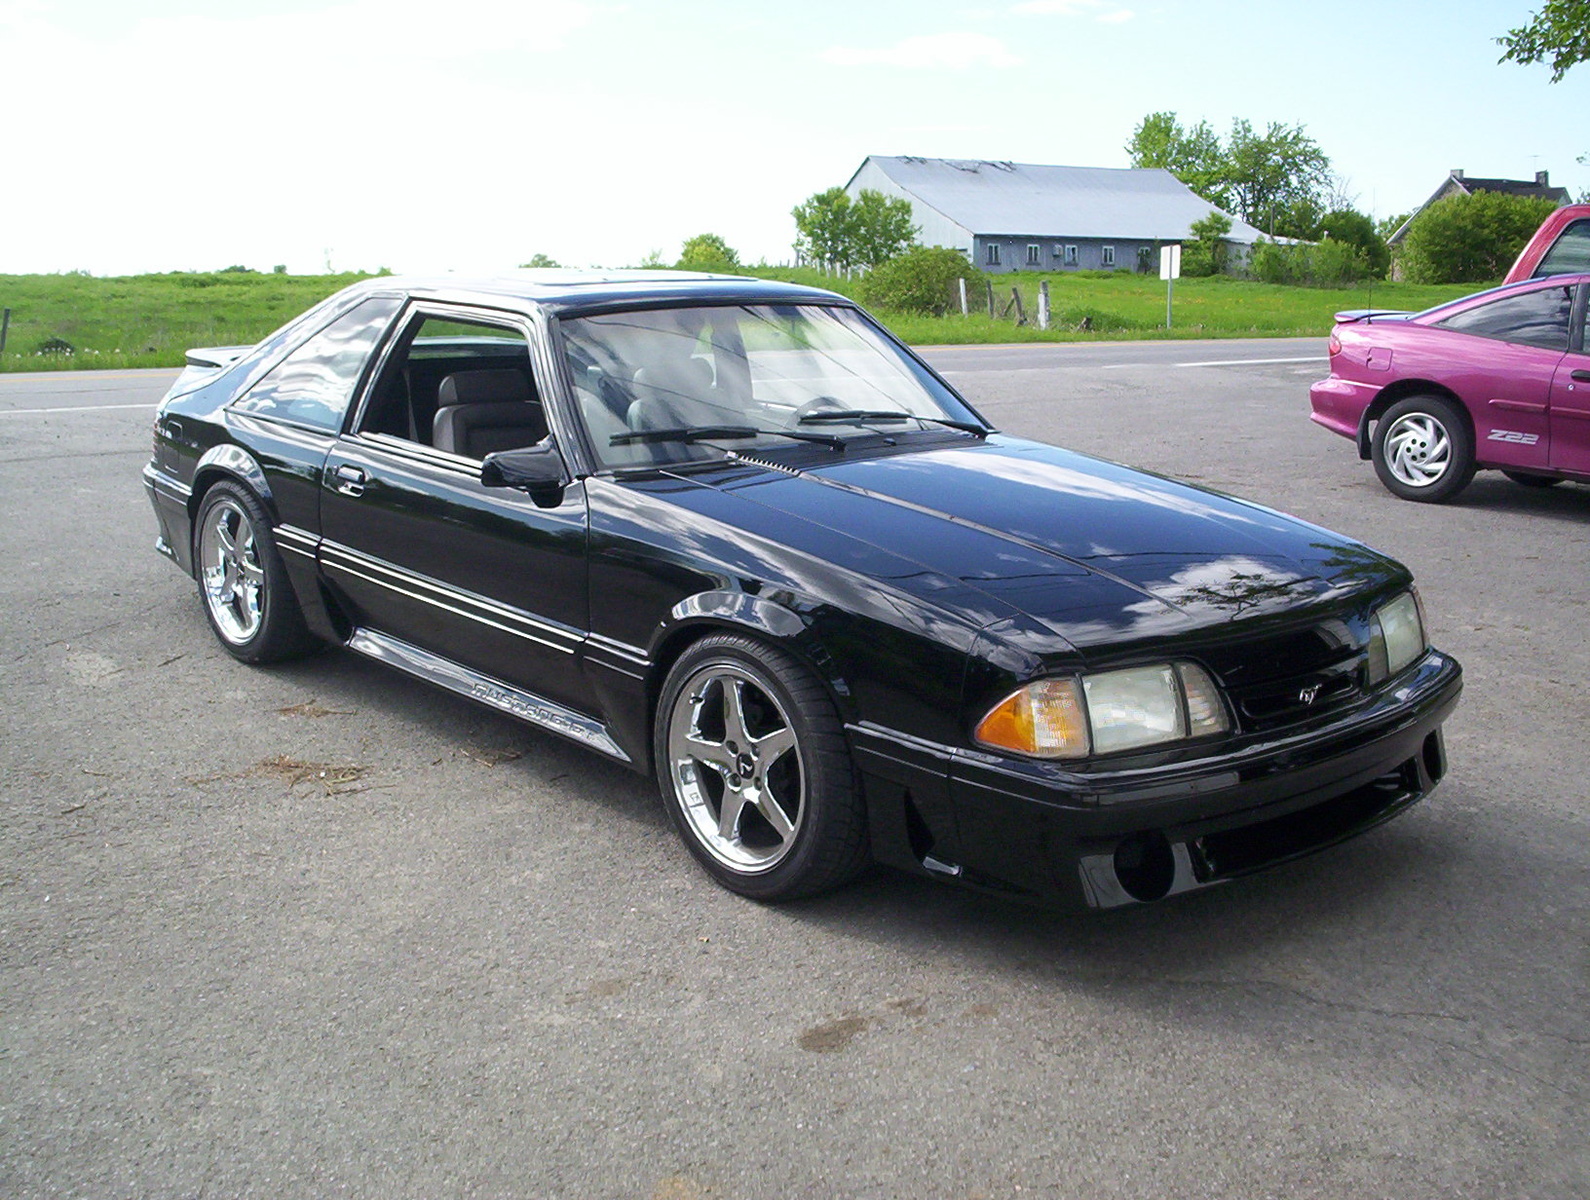 1992 Ford mustang gt convertible specs #2